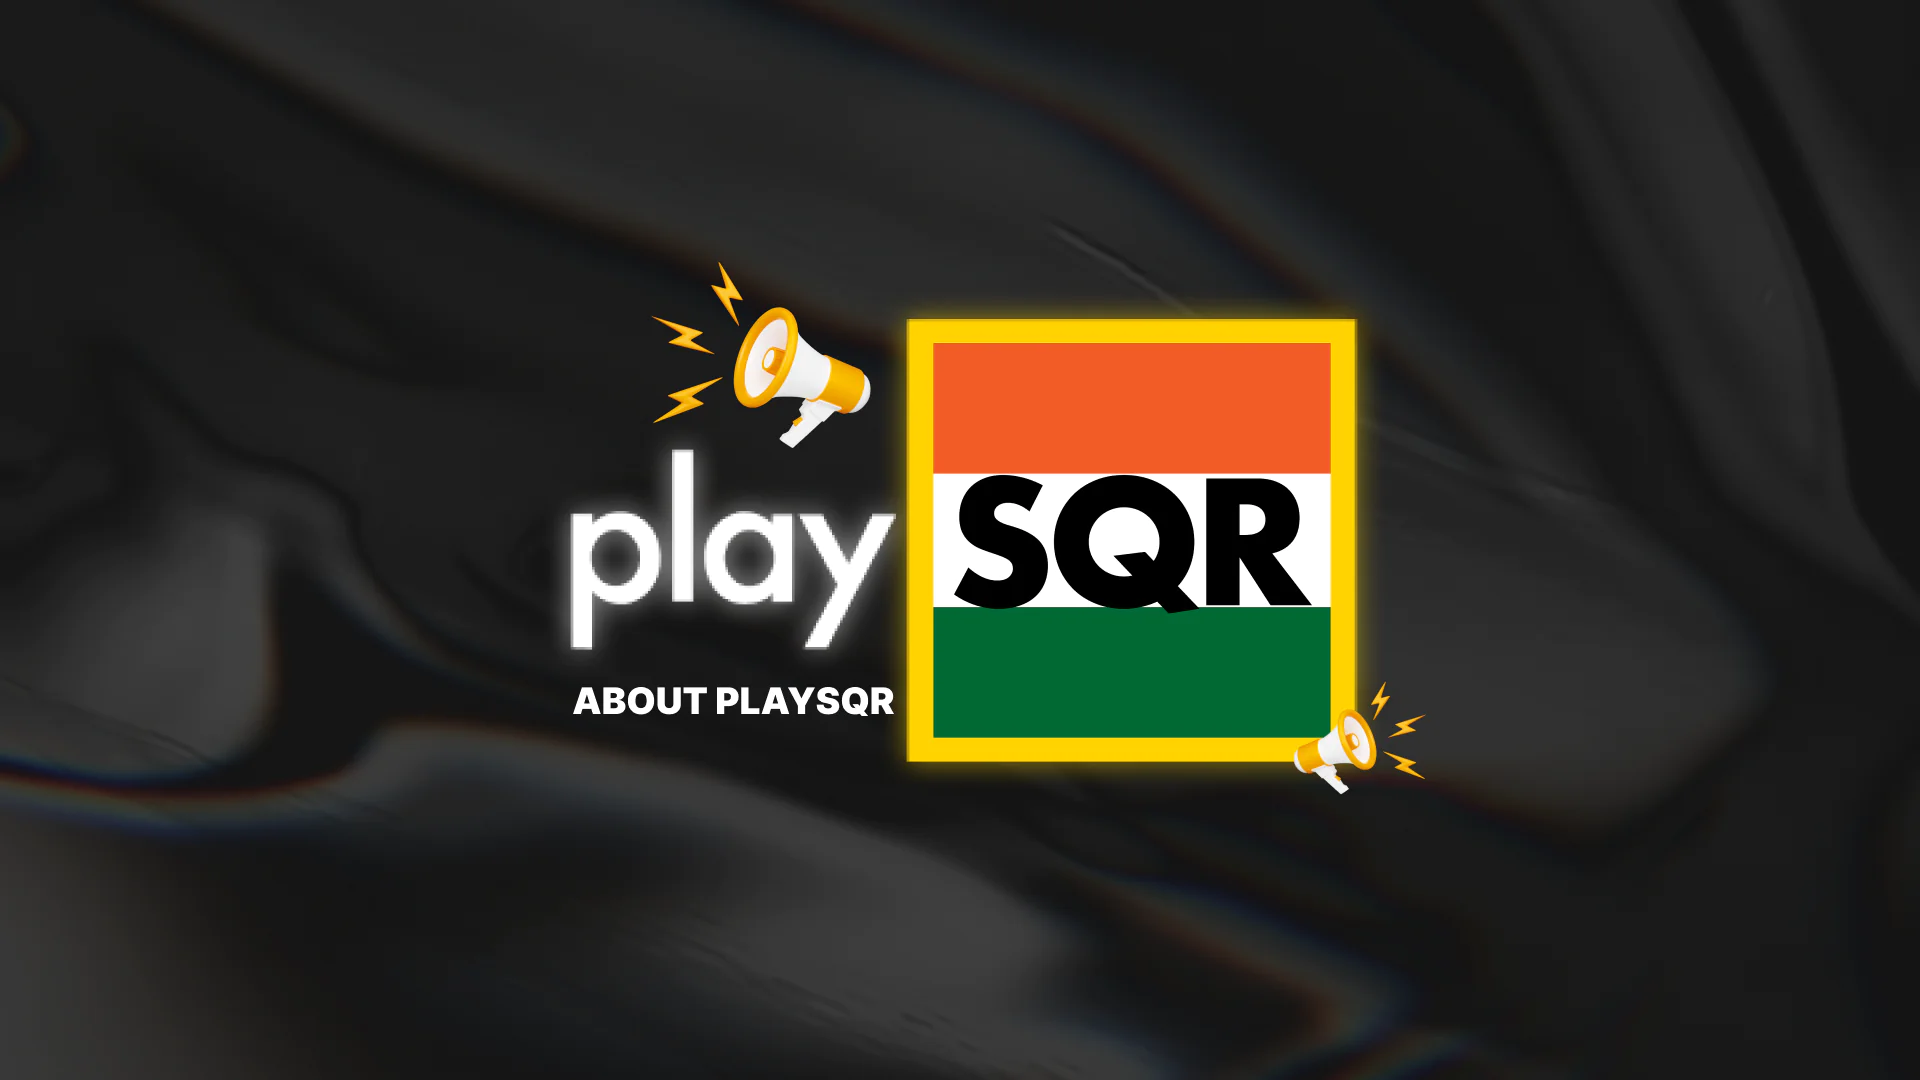 Learn more Information about PlaySQR Company